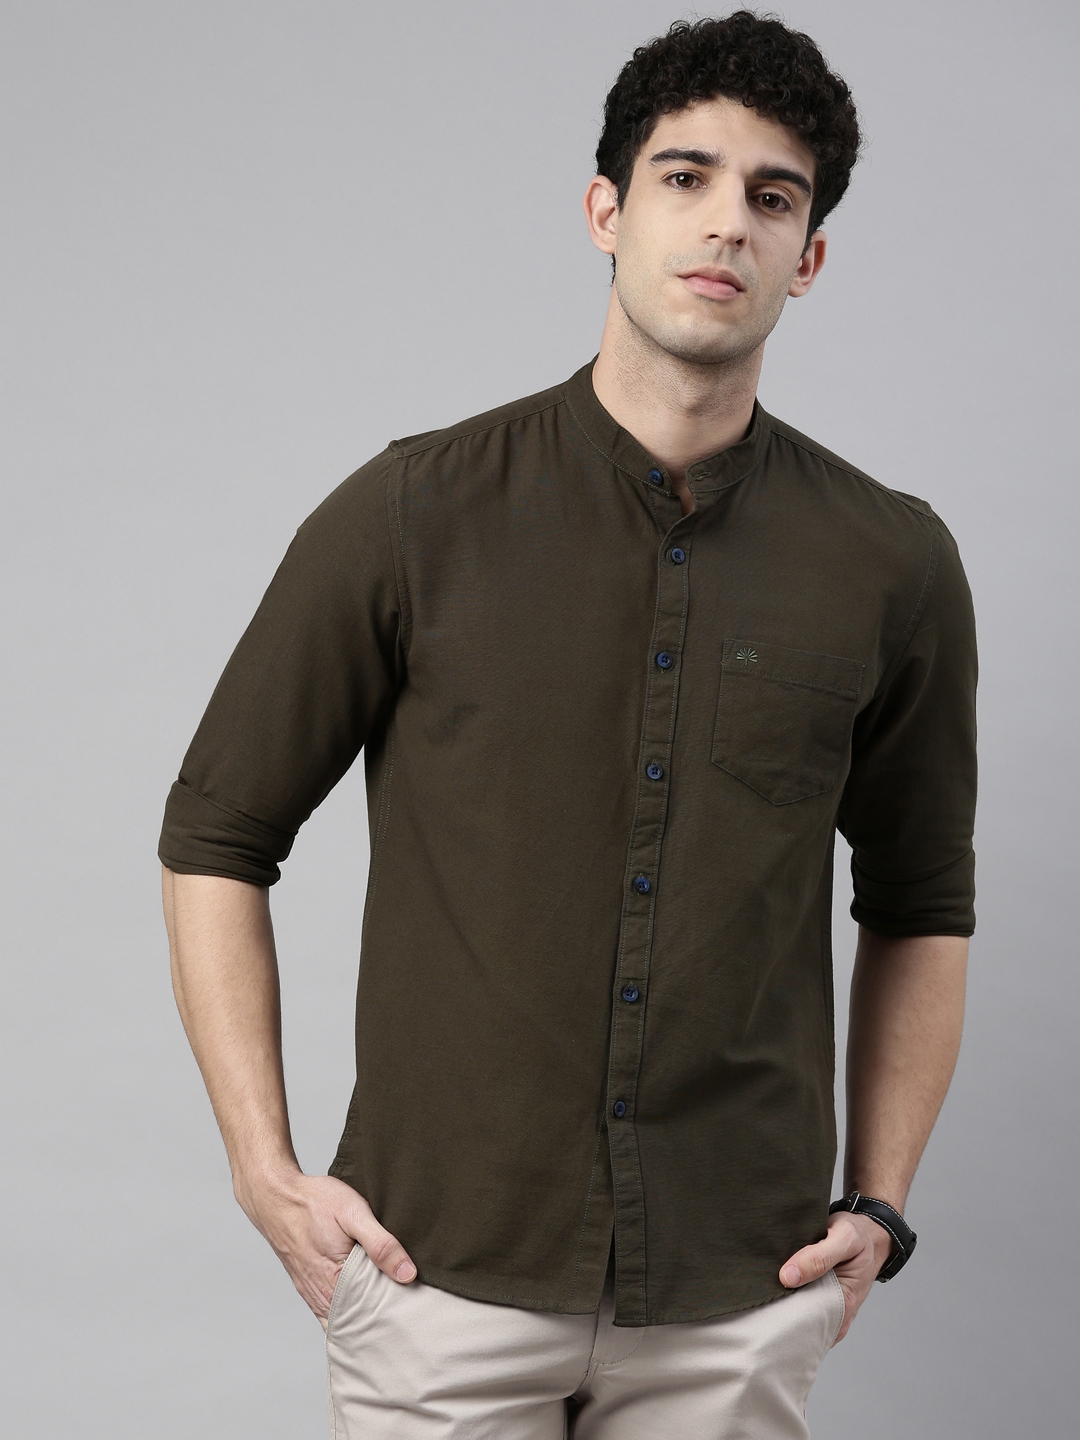 Chennis | Chennis Mens 100% Cotton Solid Chest Pocket Casual Shirt 0